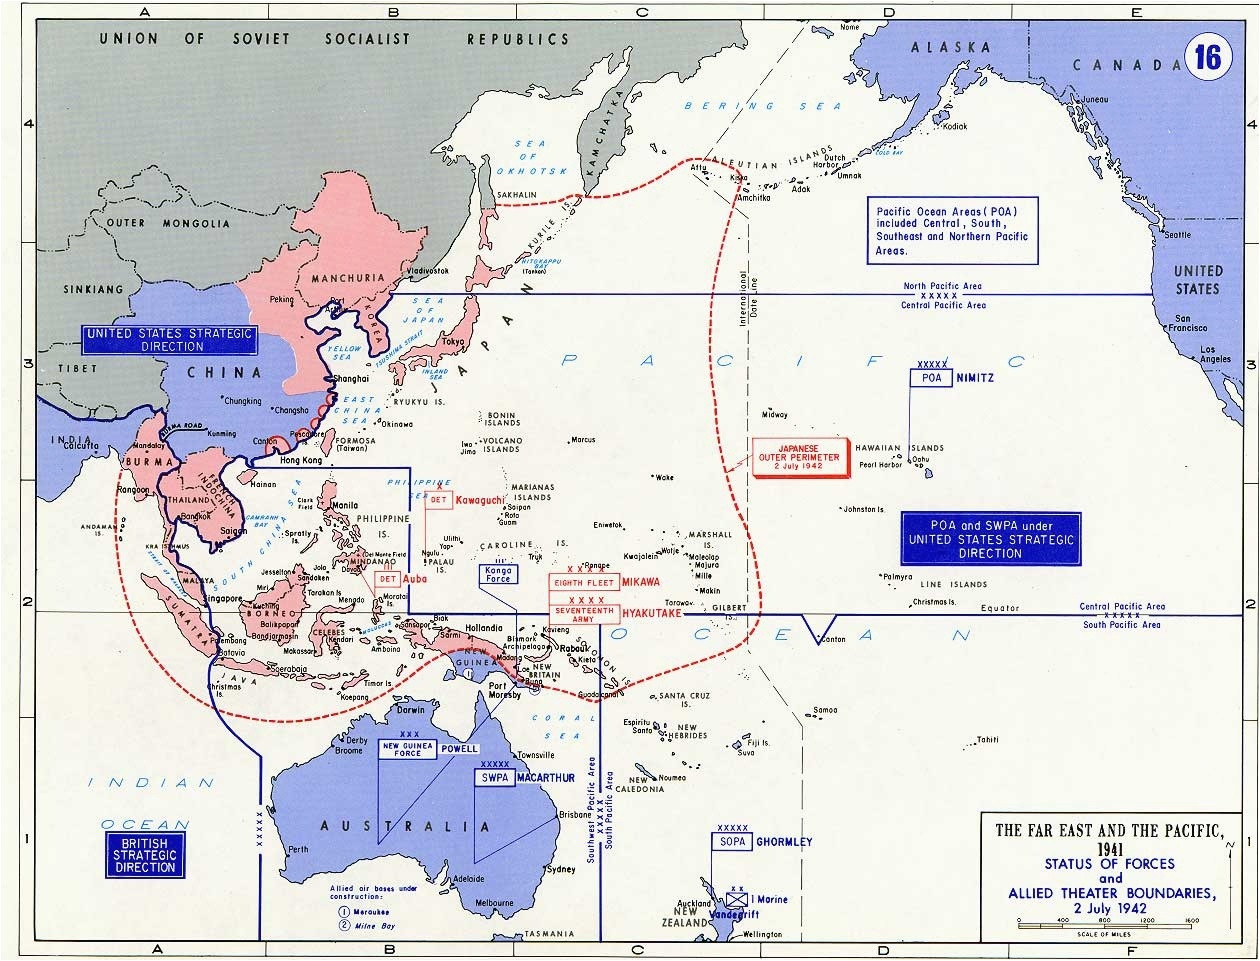 Asia Map Pics asia Europe Map Battle Map Showing the area the Far East and Pacific 1941 0d 316 14 Kb